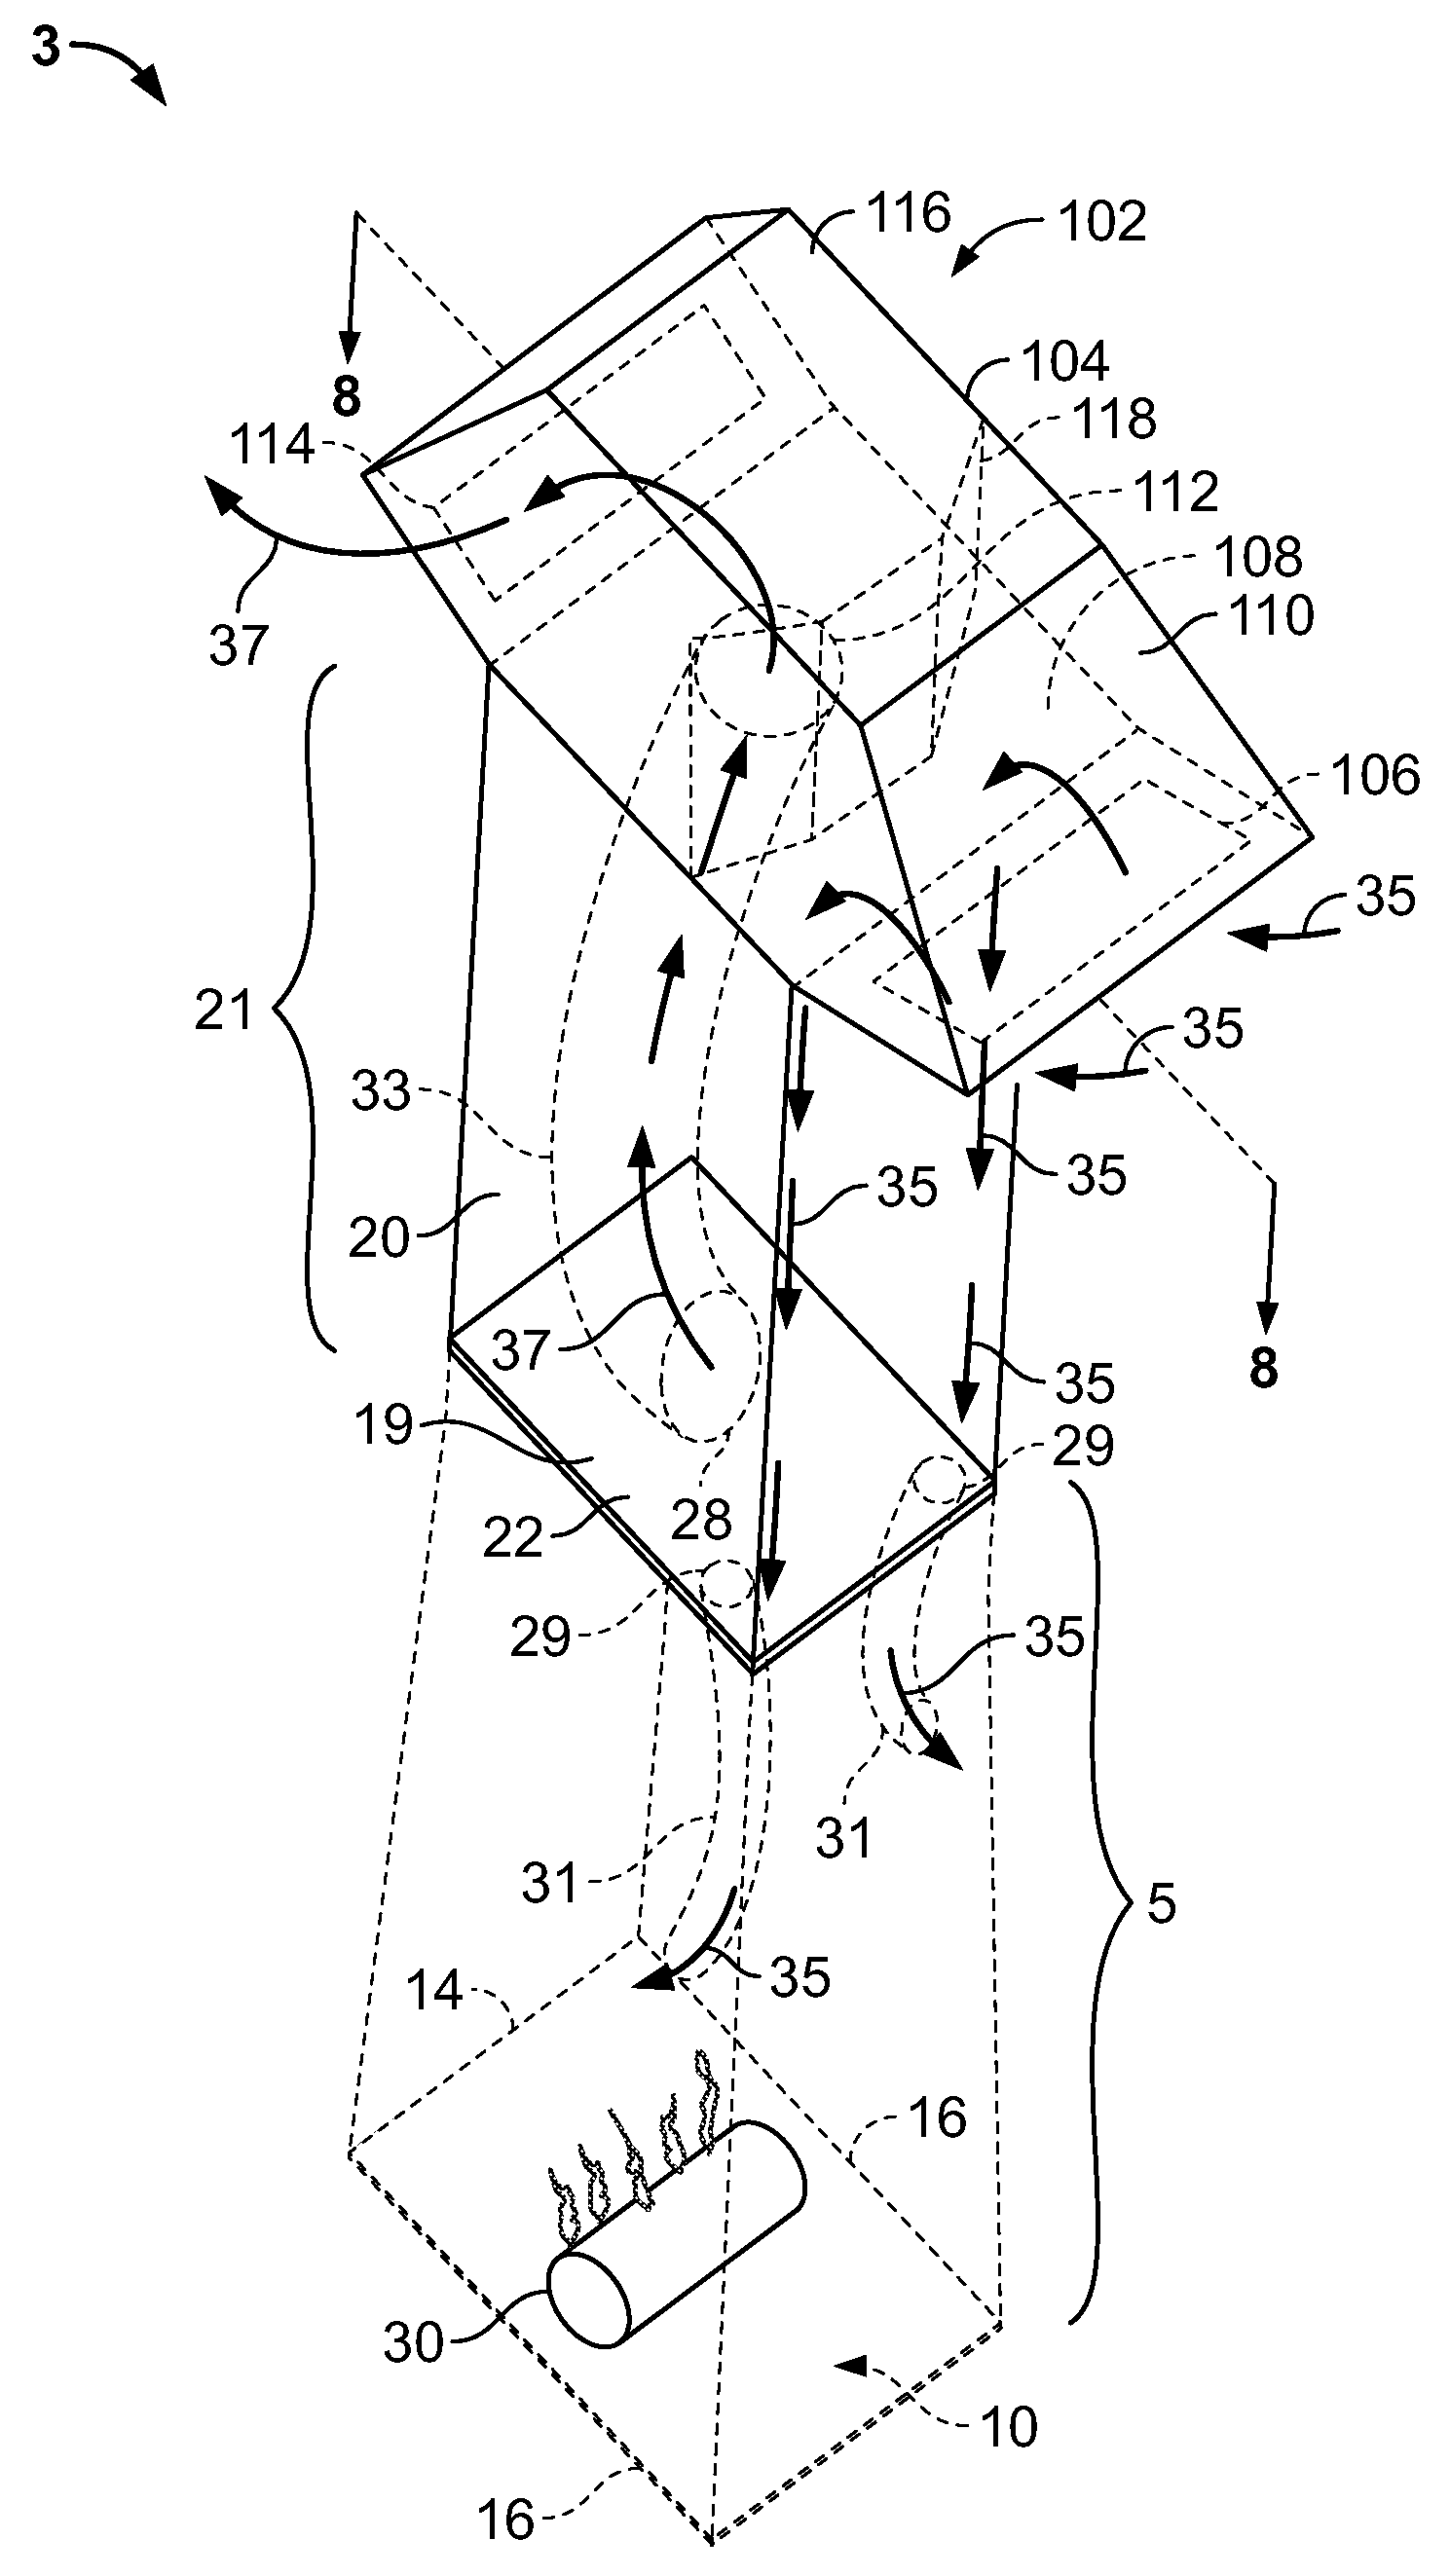 Partitioned chimney cap and fireplace venting system